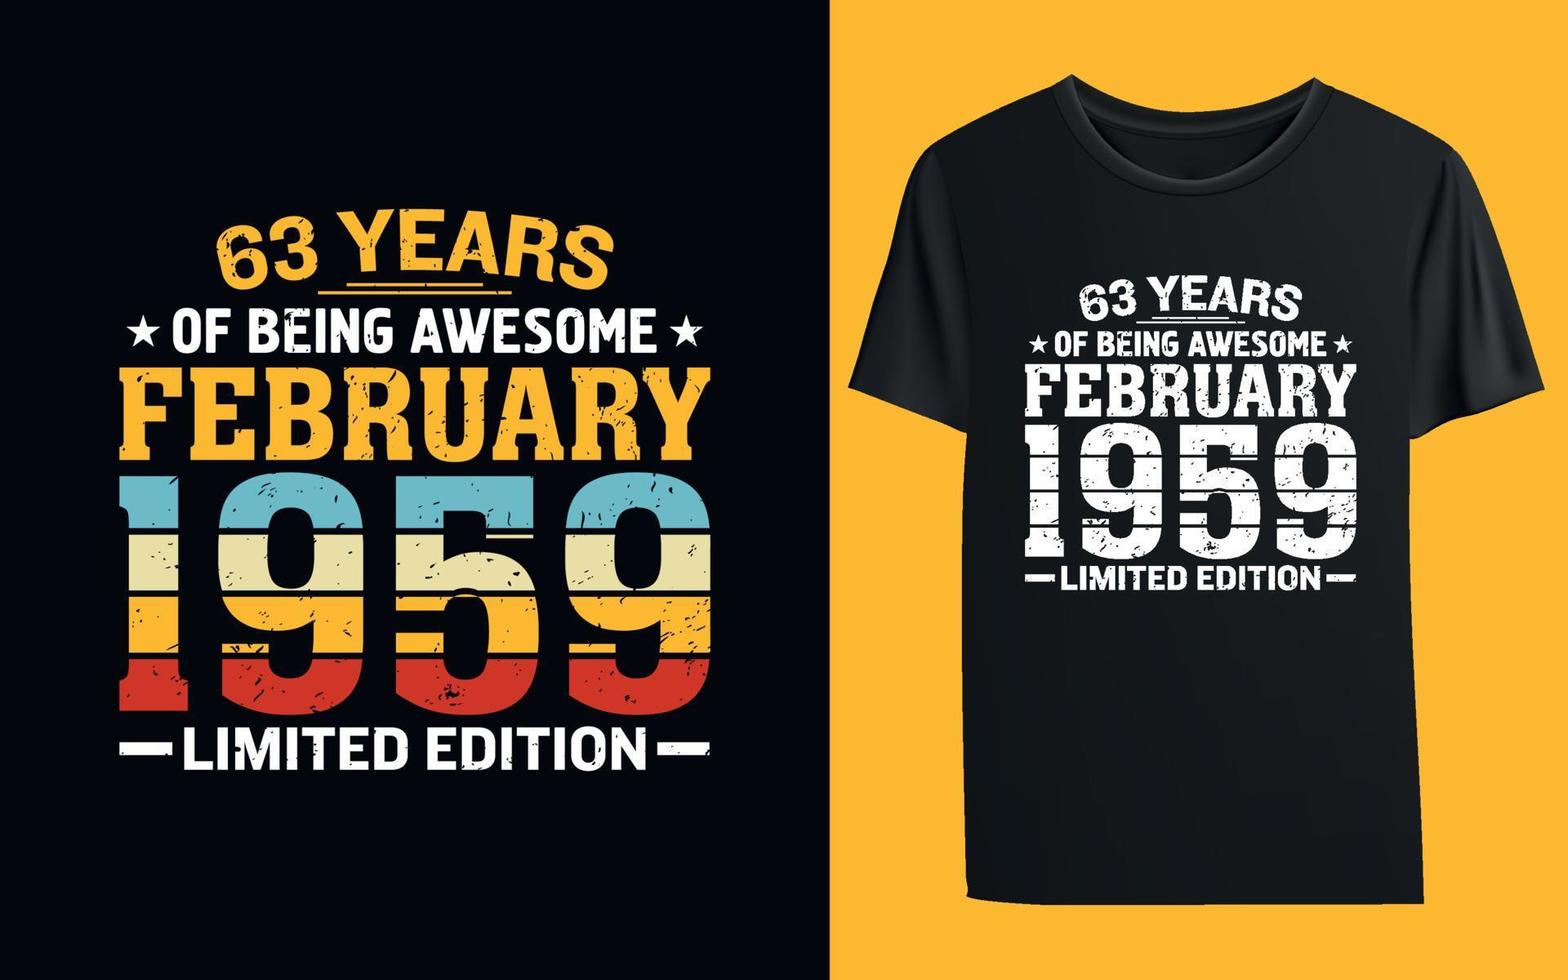 63 Years Of Being Awesome February 1959 Limited Edition T-shirt Template vector